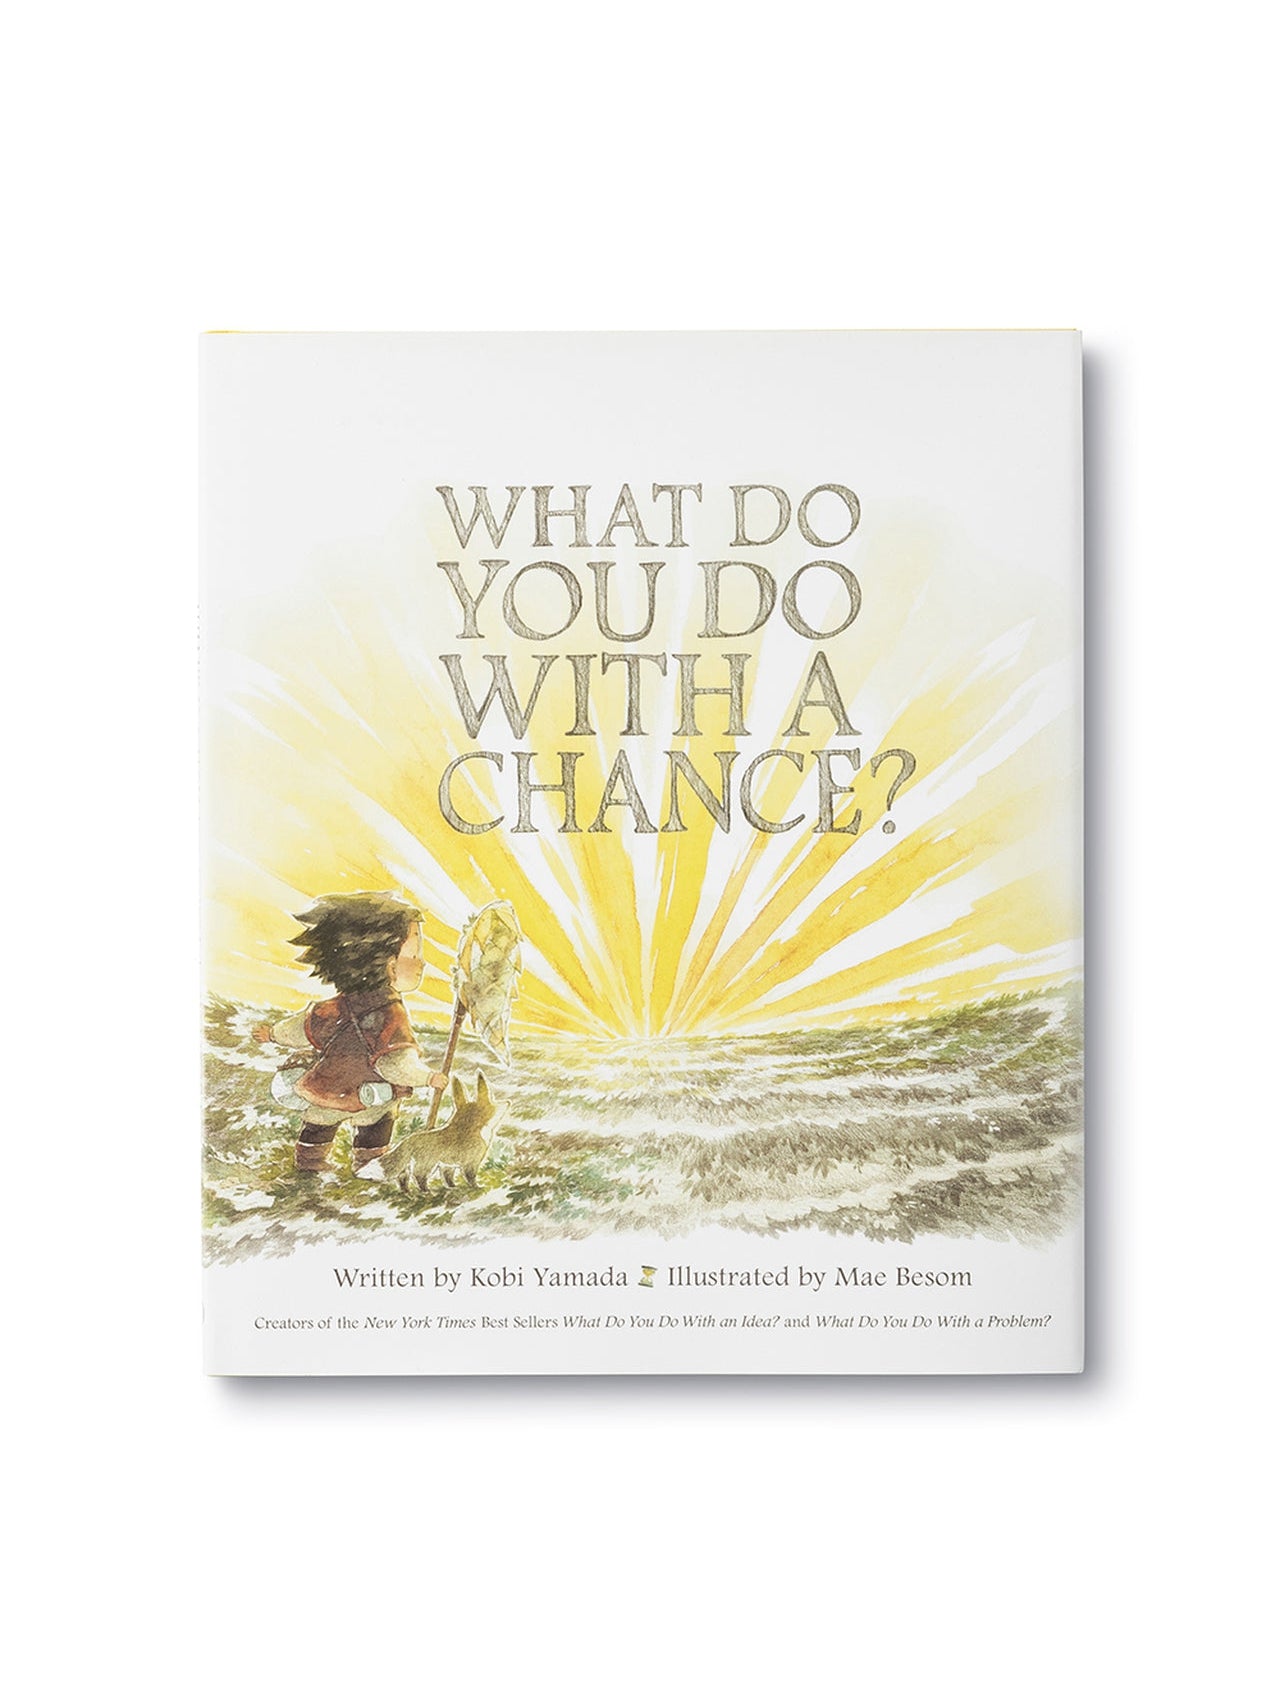 What Do You Do with a Chance?